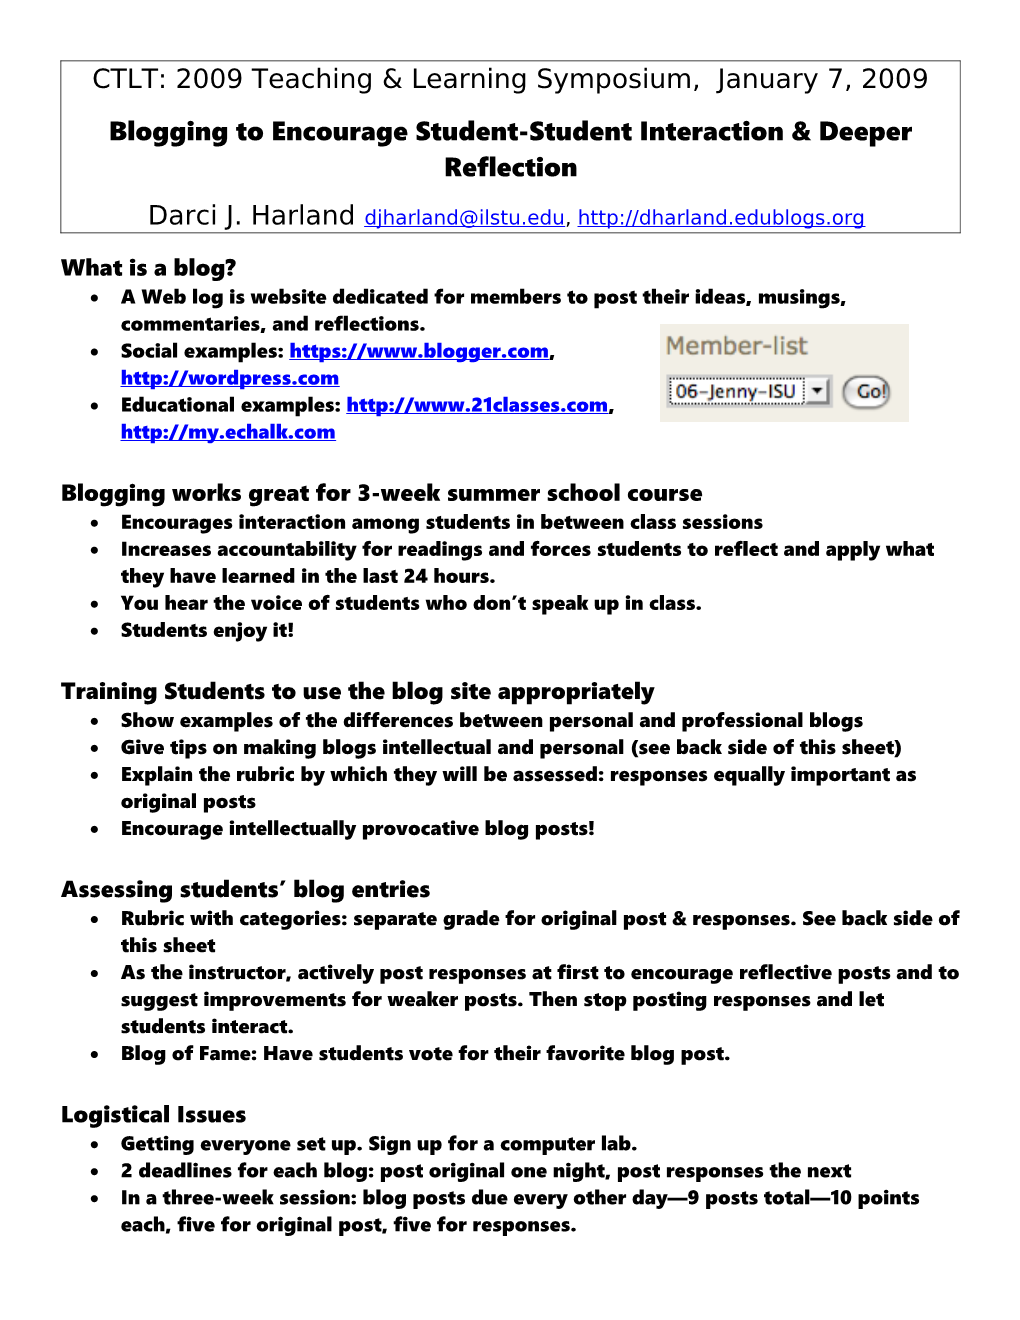 Blogging to Encourage Student-Student Interaction& Deeper Reflection